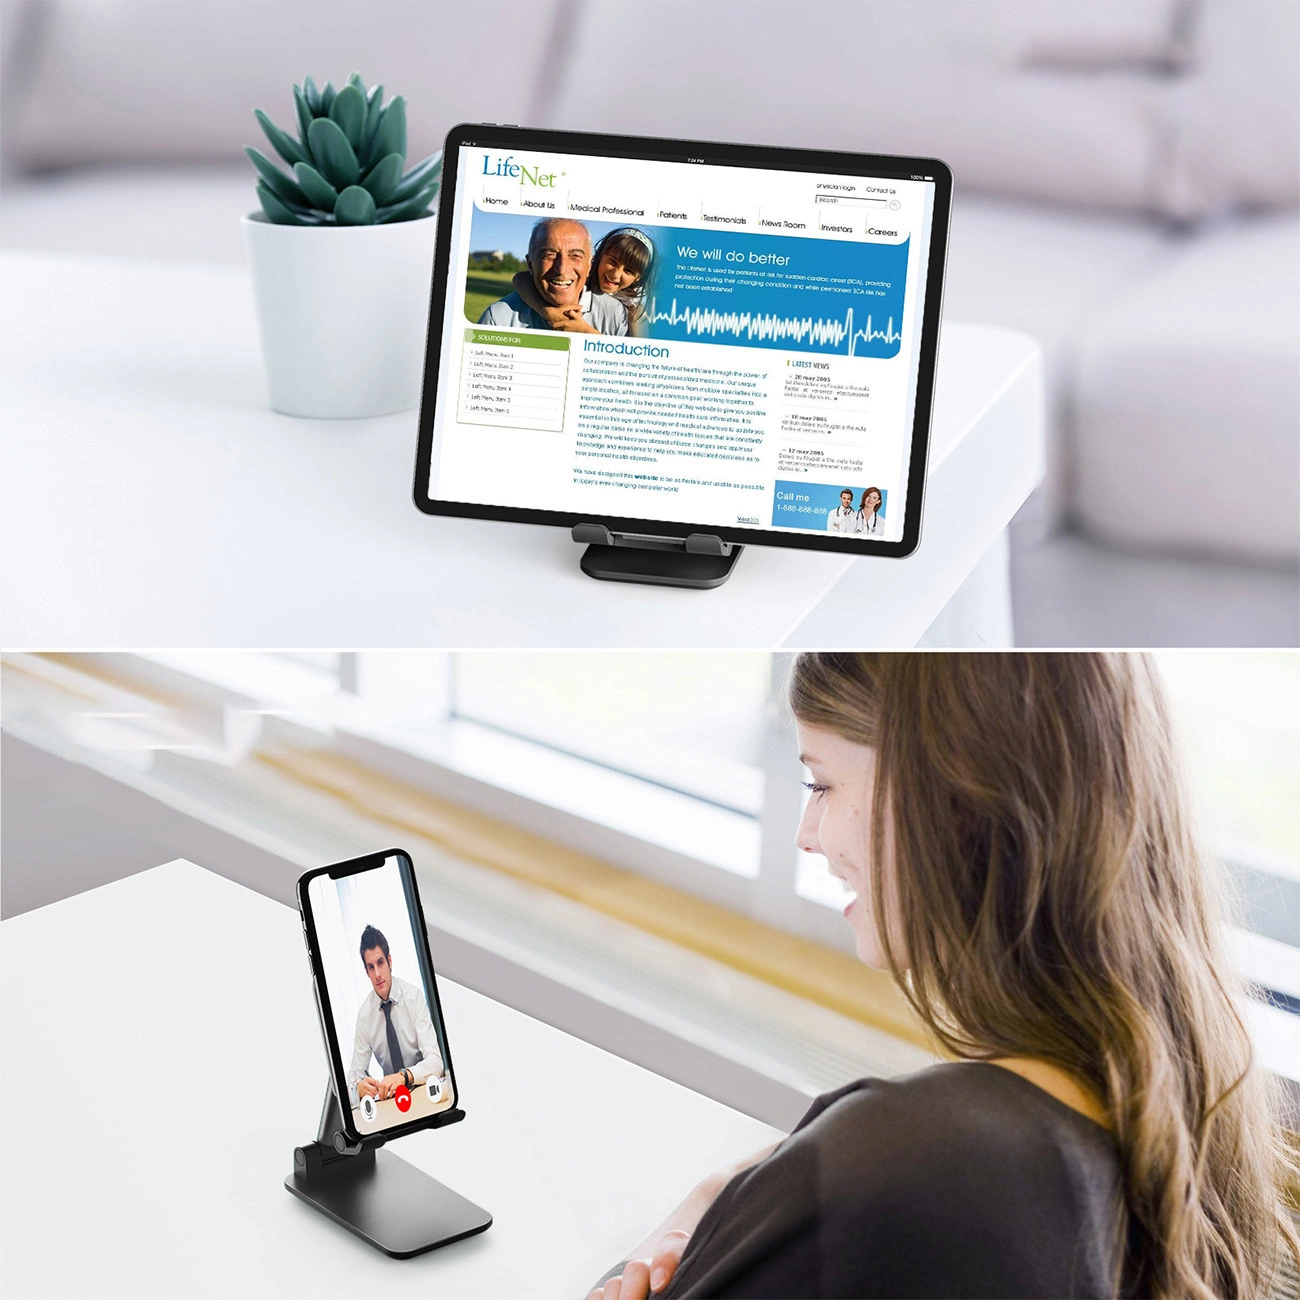 Tablet on a Choetech H8-BK stand standing on a white table with a website displayed, woman making a video call on a smartphone standing on a Choetech H8-BK stand